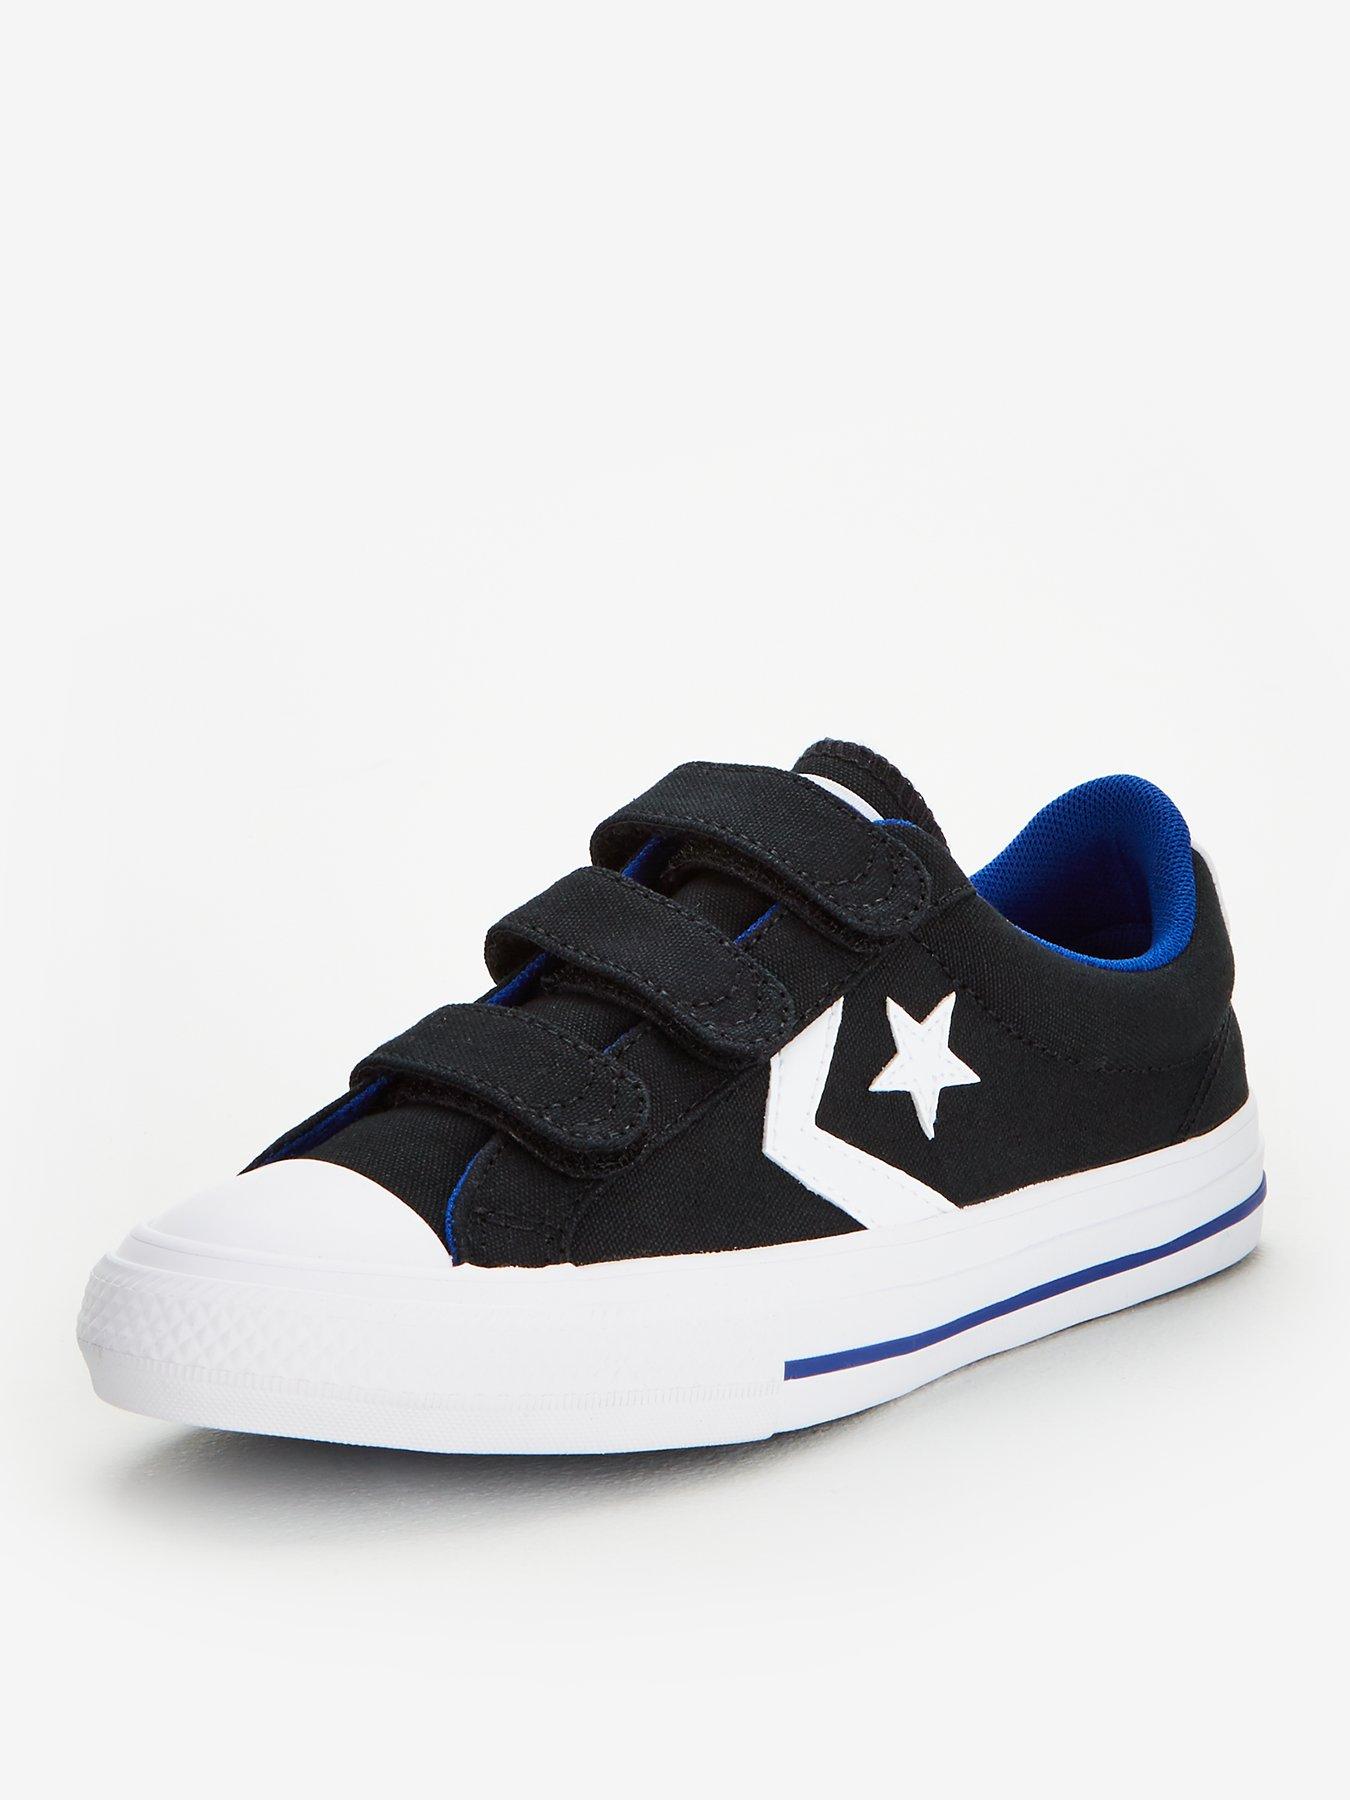 converse star player size 10